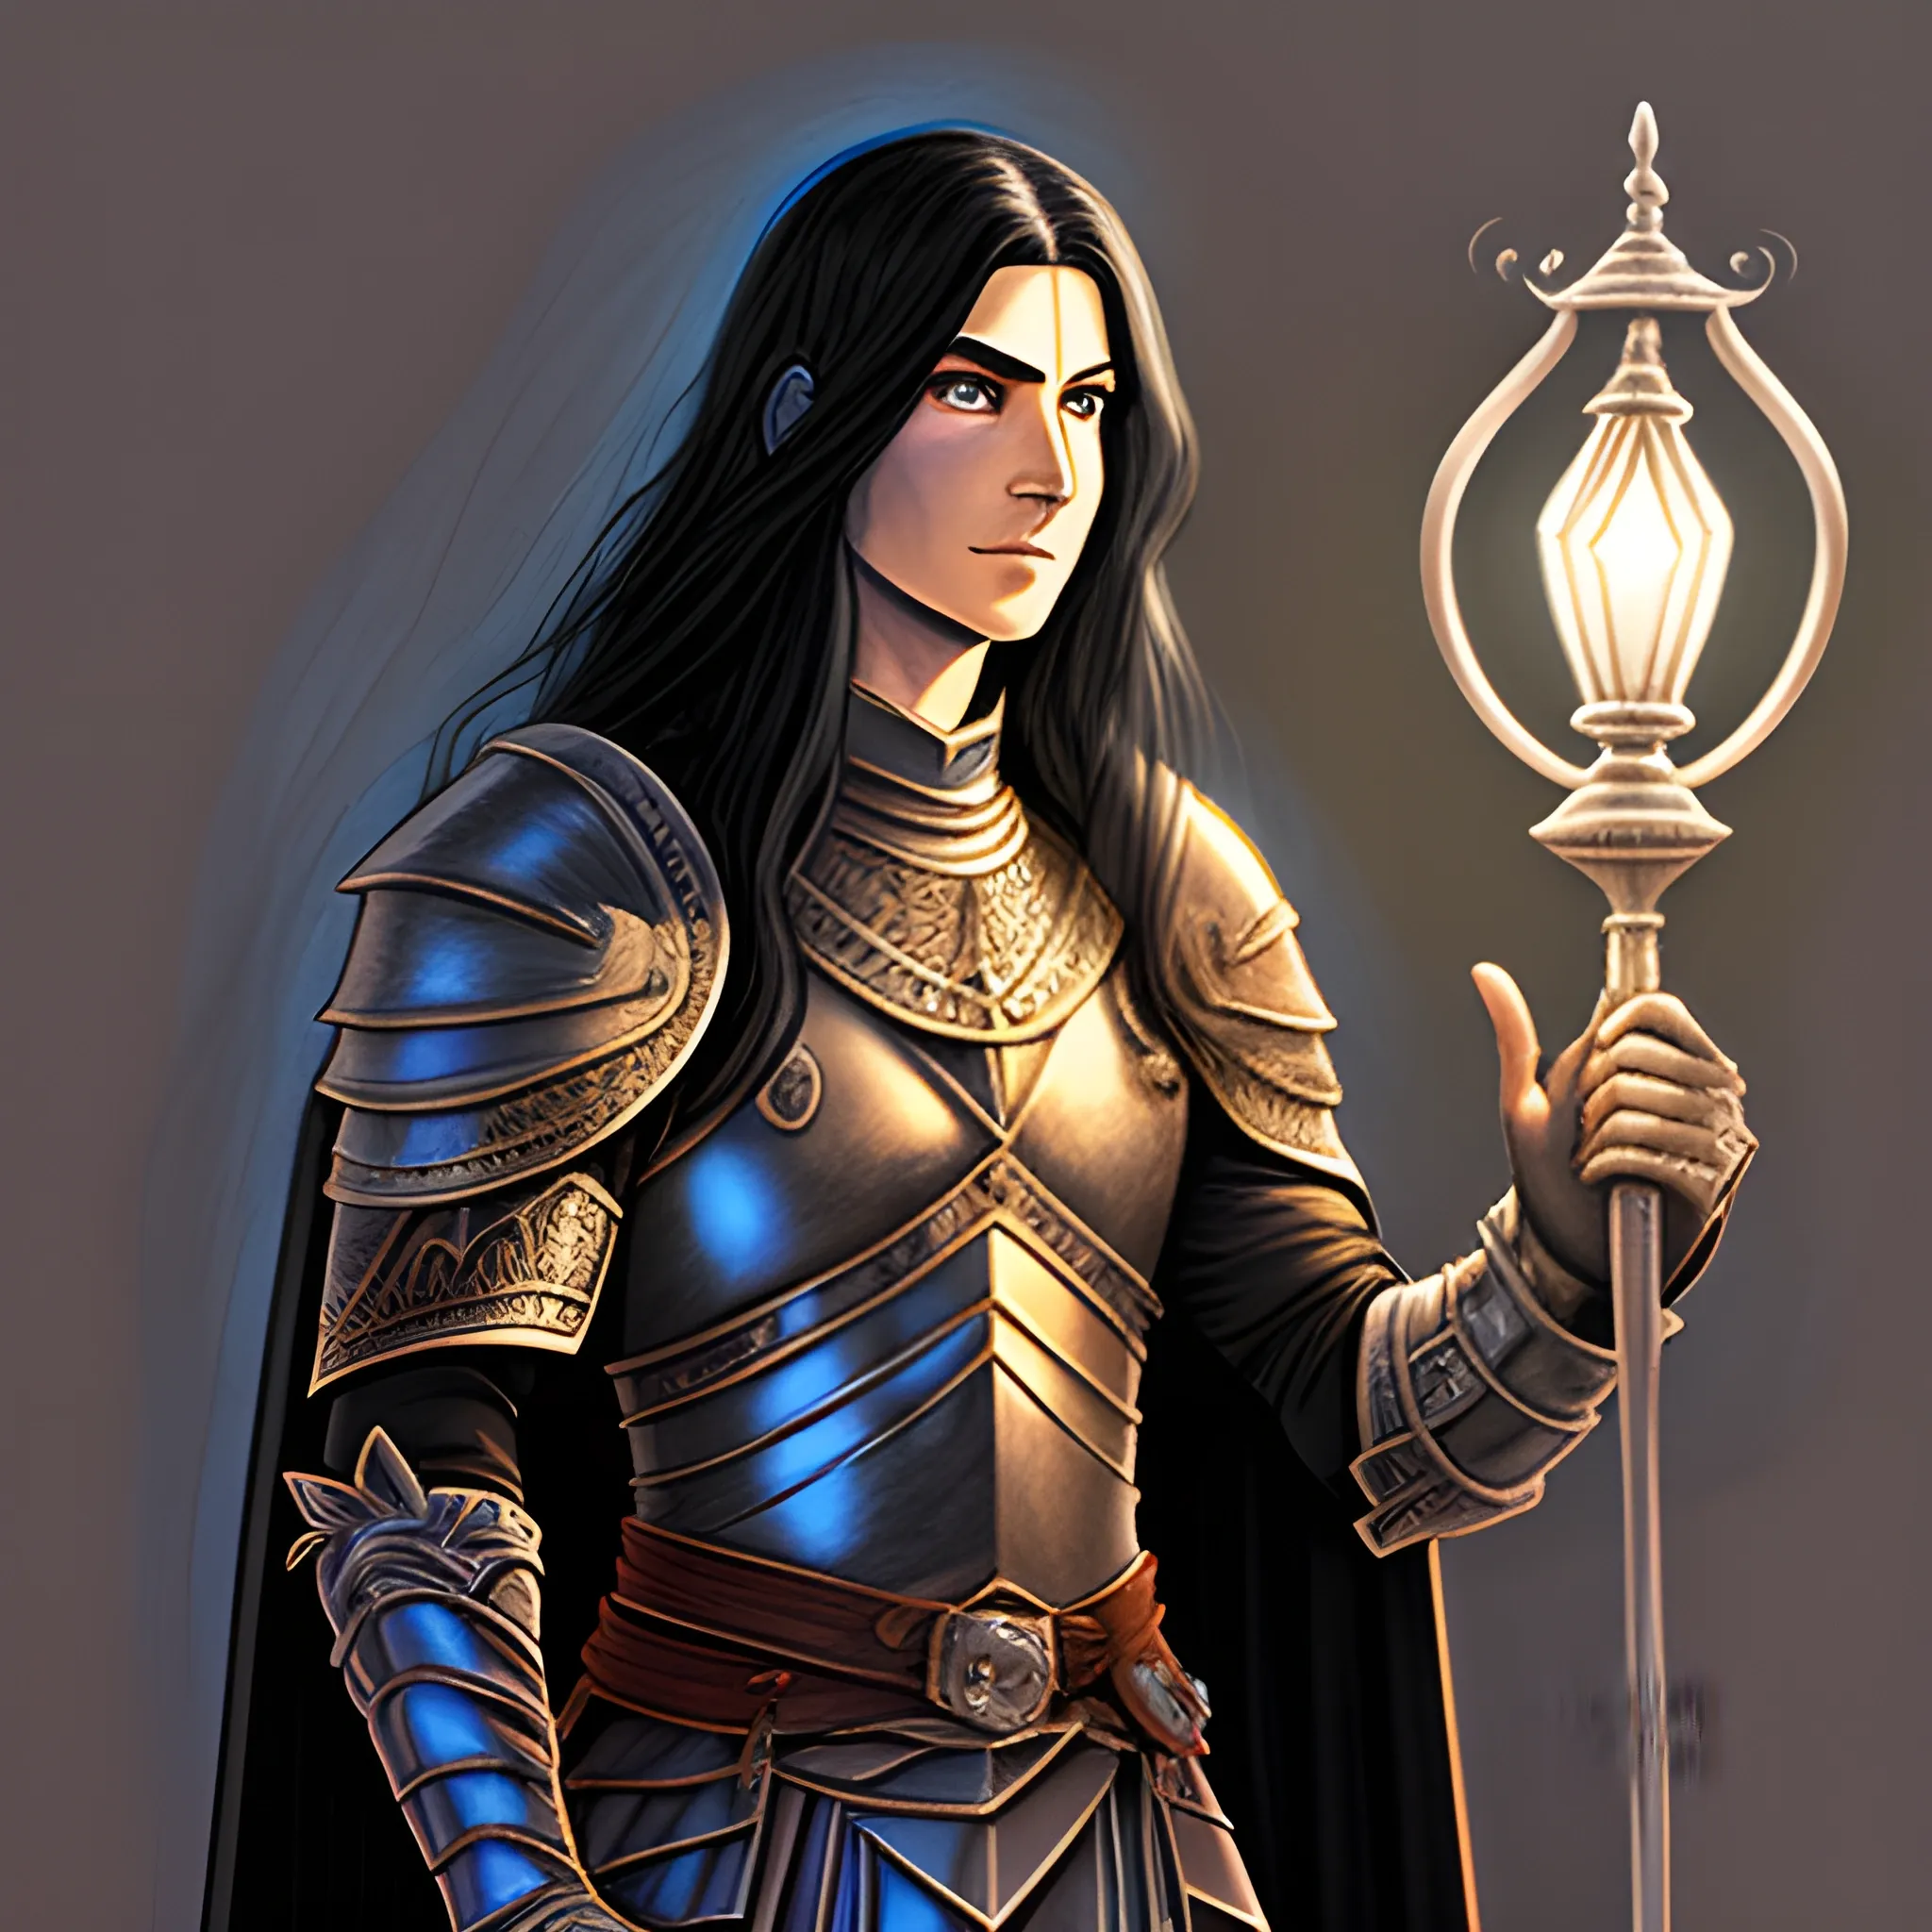 long black haired, male, aasimar, leather armor, cape holding a djinni lamp, glory
, Pencil Sketch, Cartoon